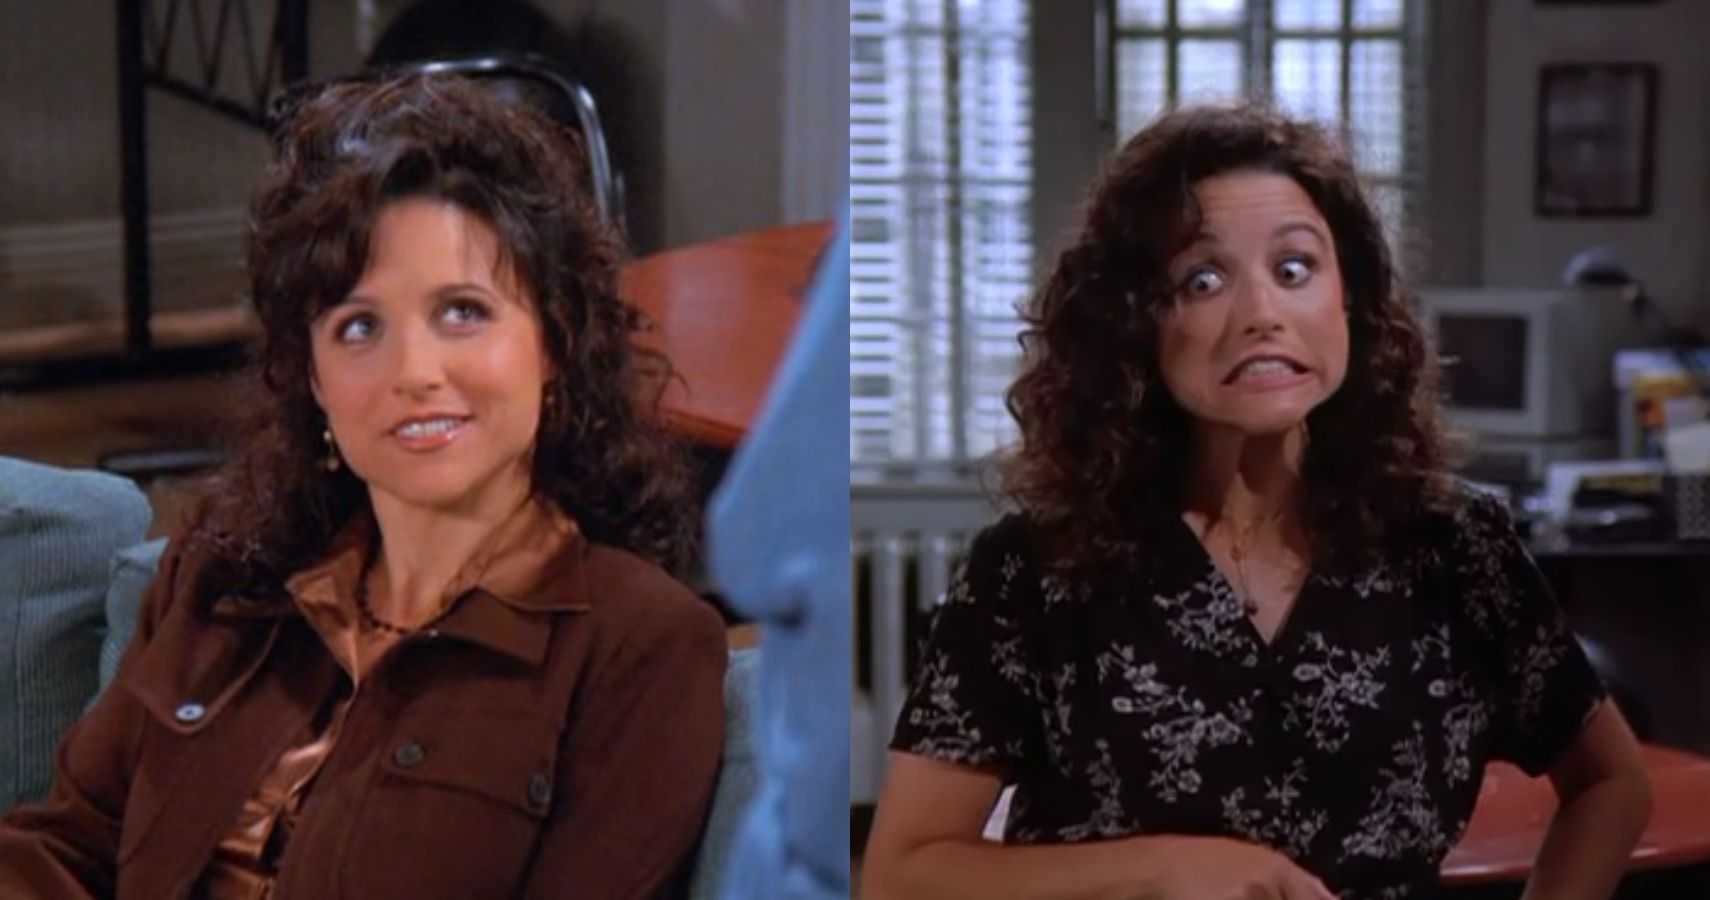 Seinfeld: 10 Things About Elaine That Have Aged Poorly.